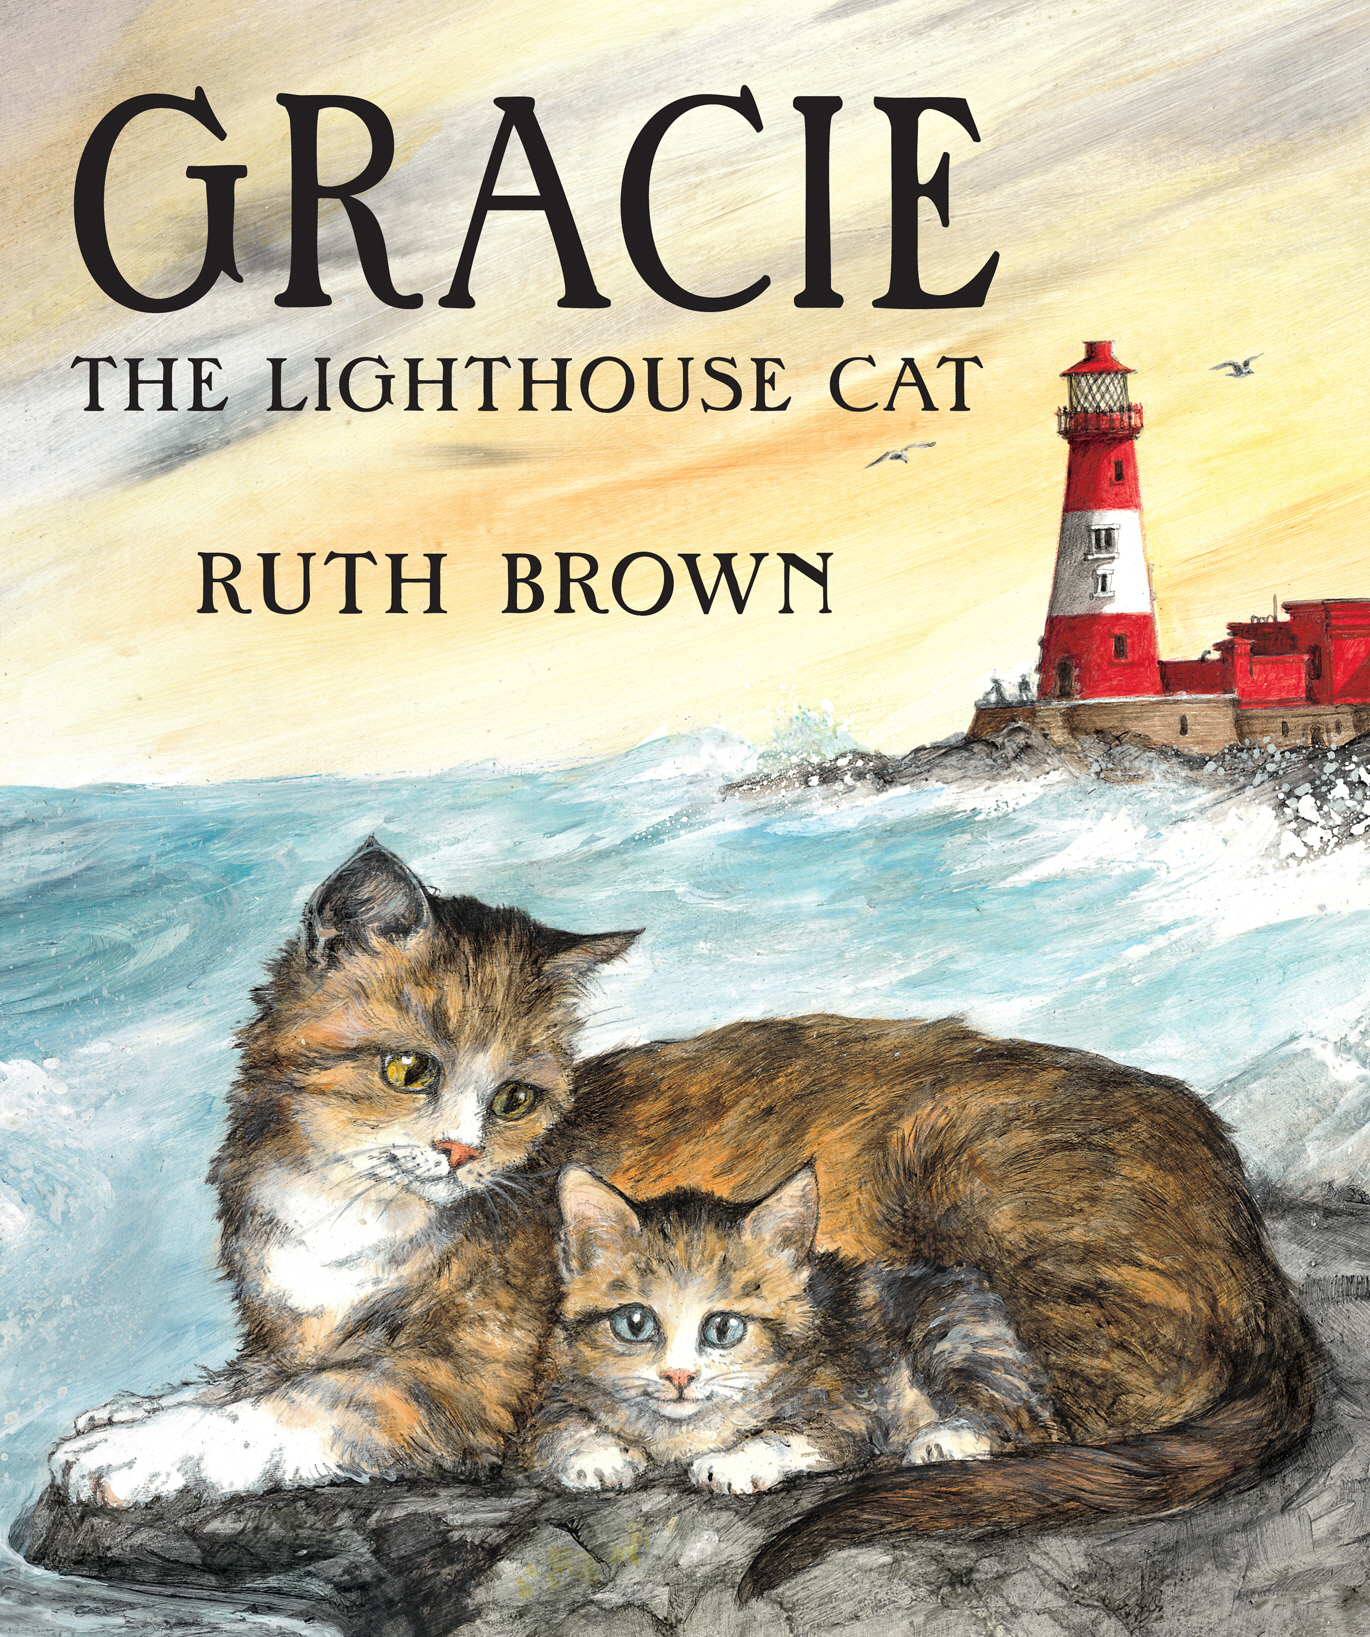 Gracie, the Lighthouse Cat